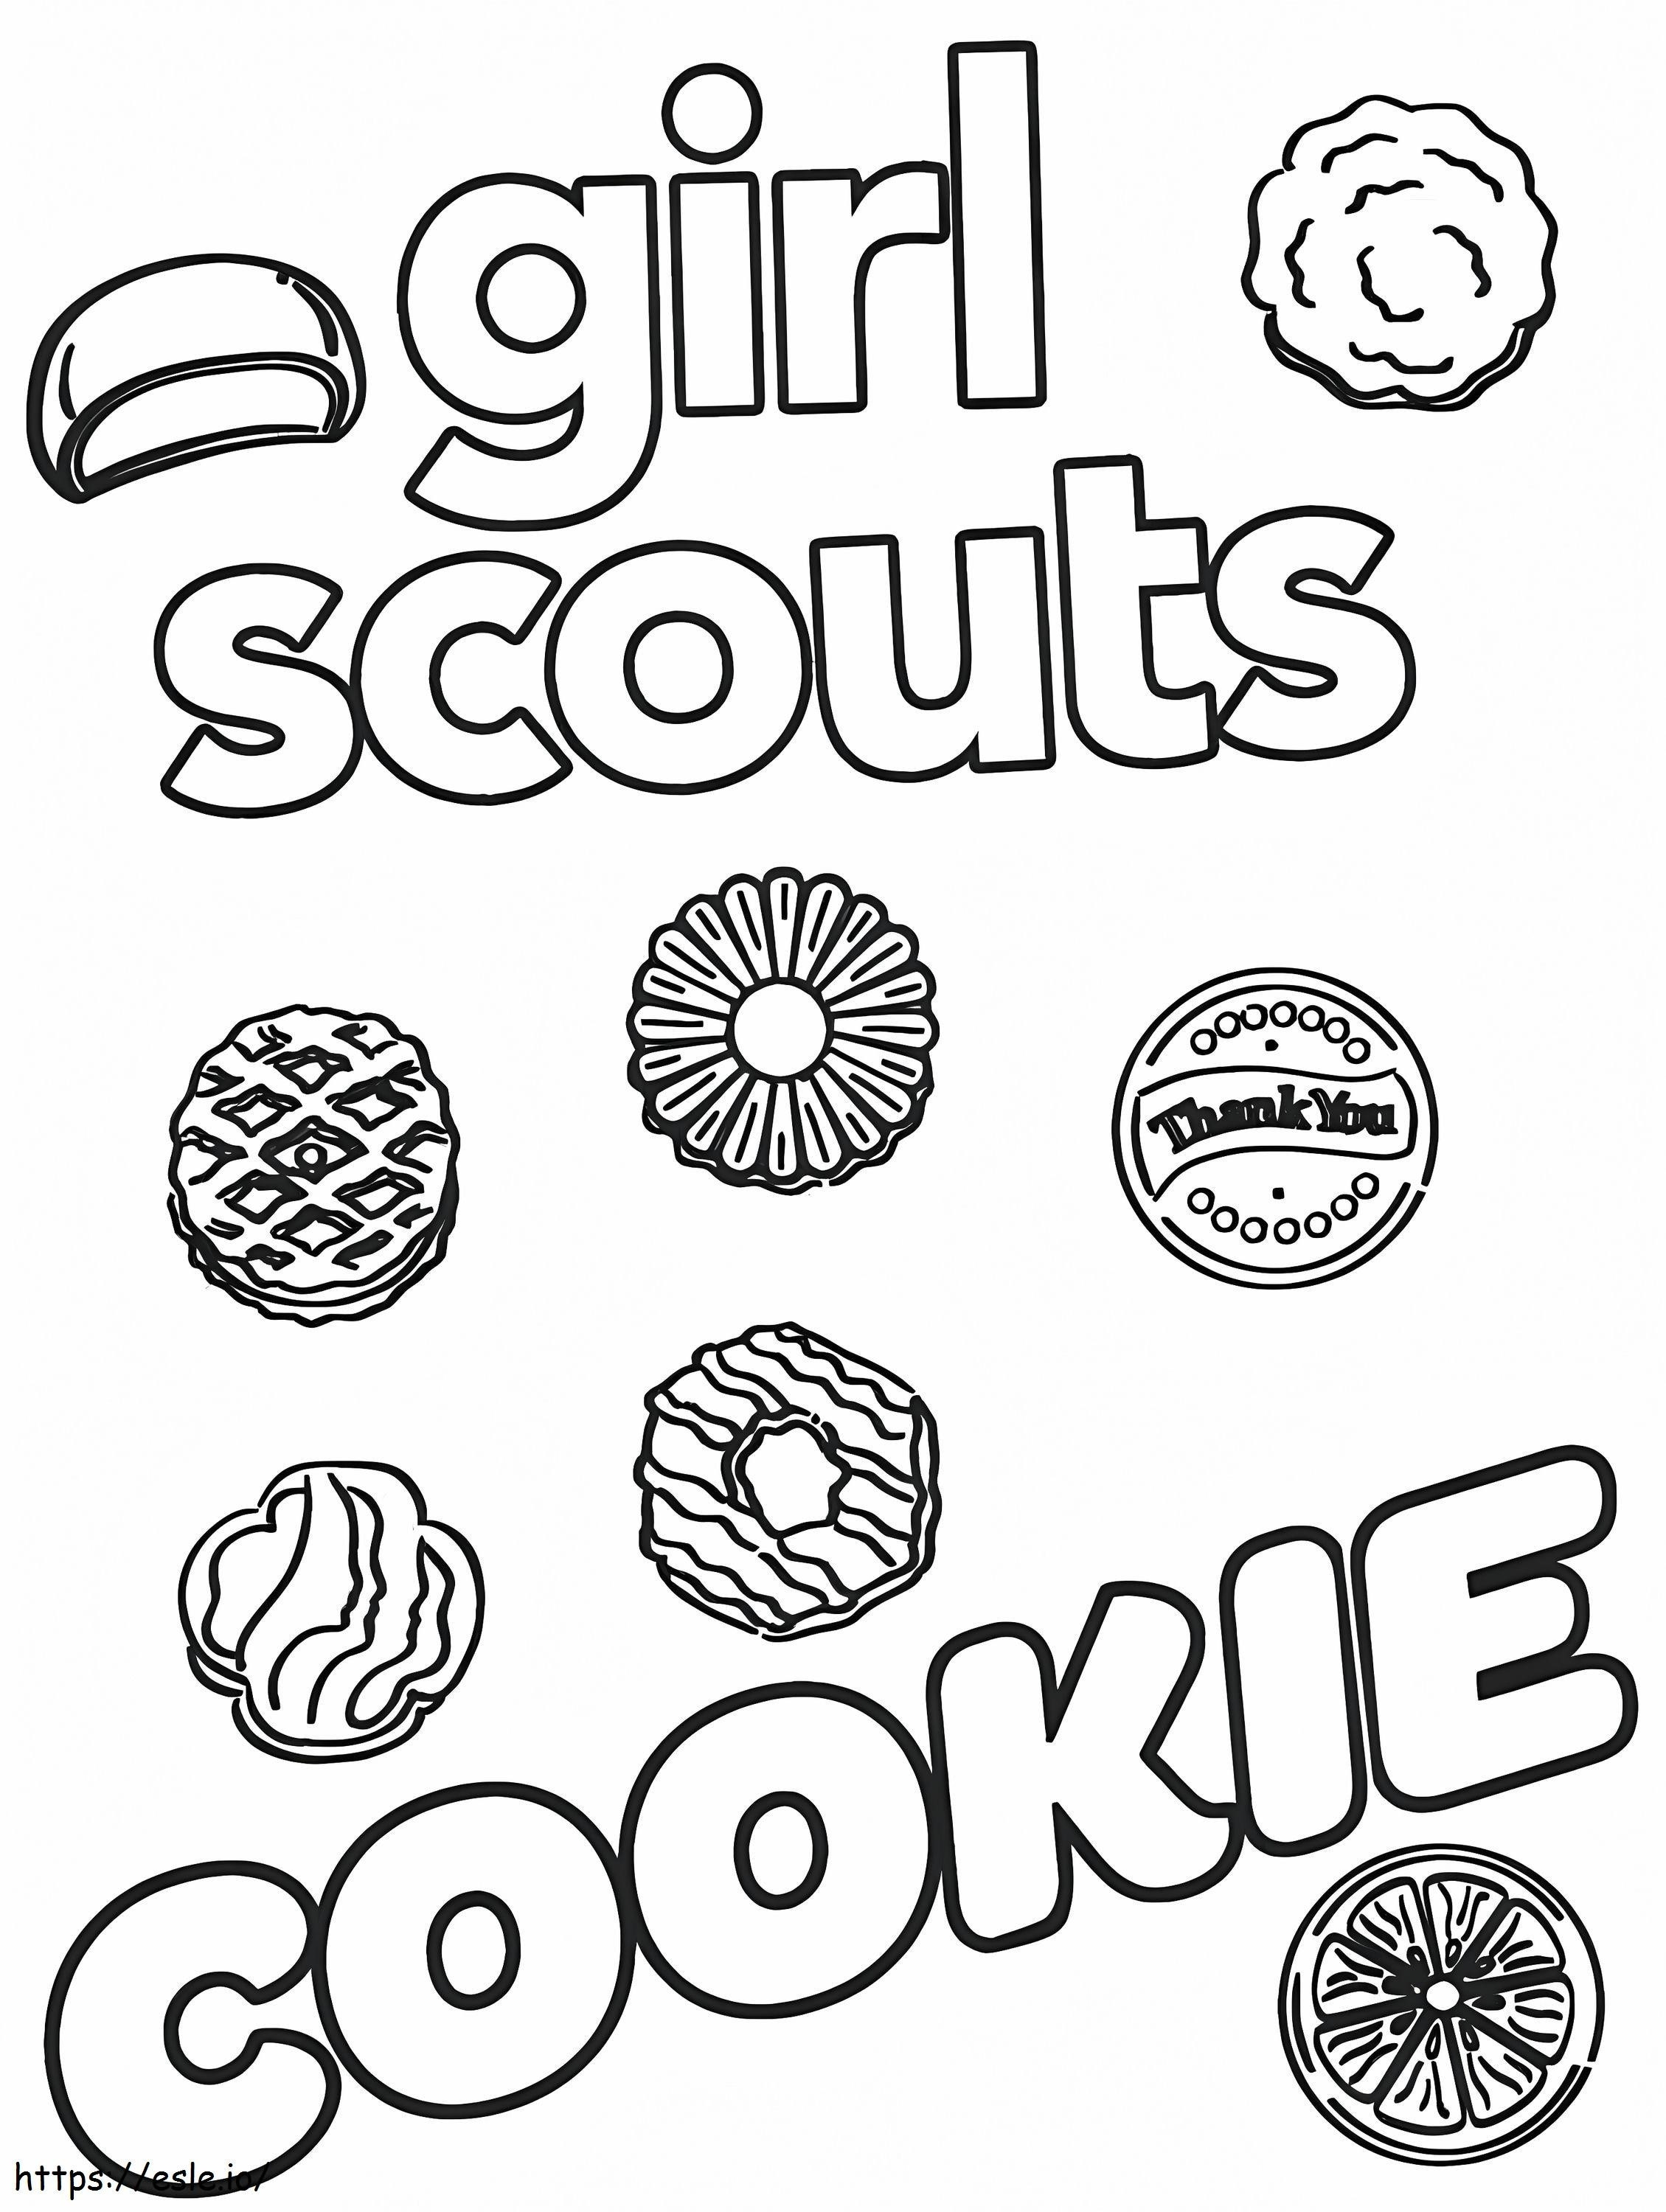 Girl Scout Cookie coloring page